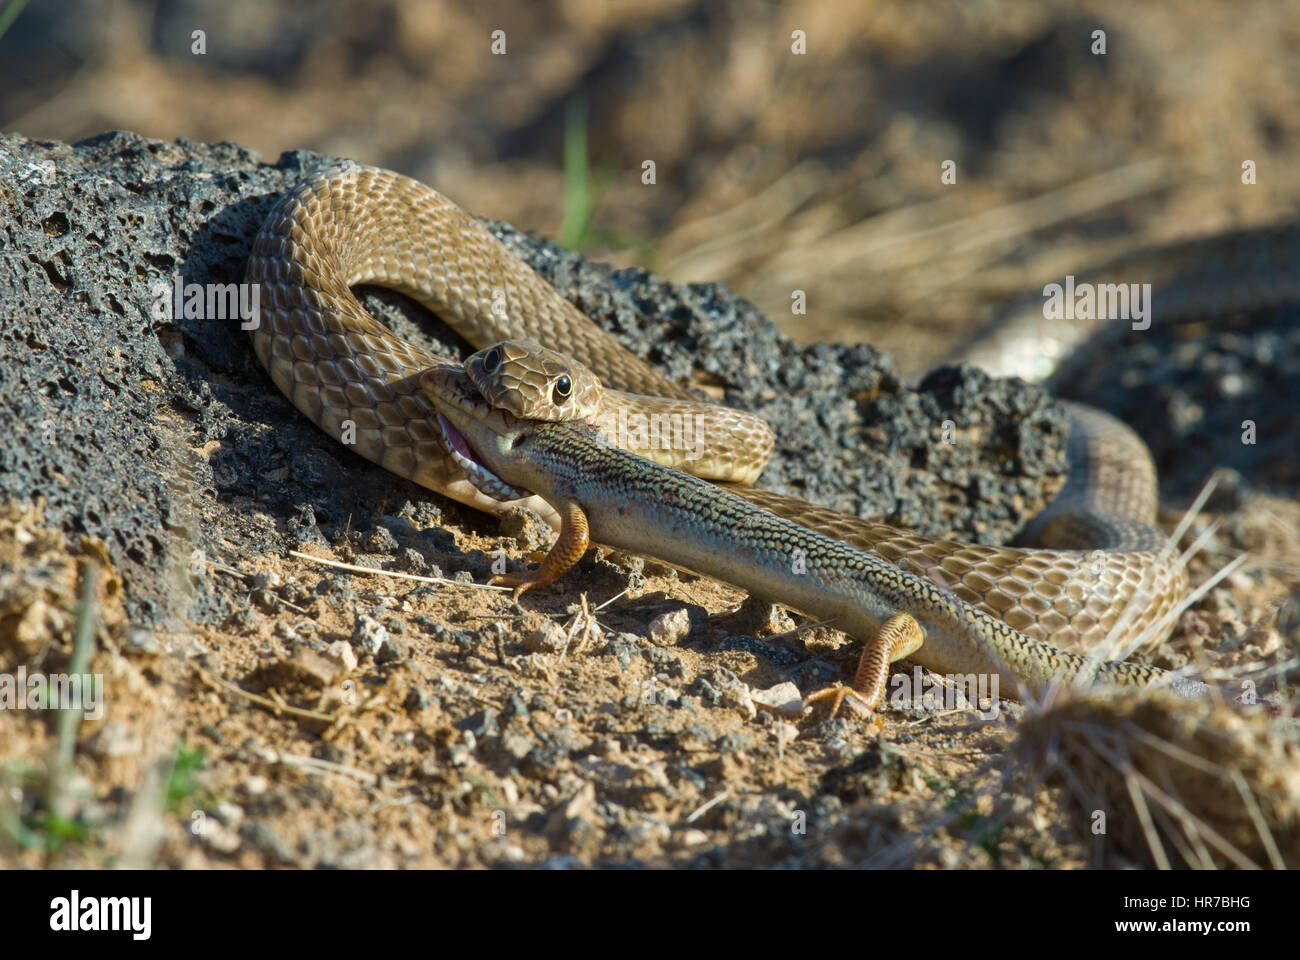 Western Coachwhip eating a Great Plains Skink, Volcanoes Day Use Area, Petroglyph National Monument, New Mexico, USA. Stock Photo